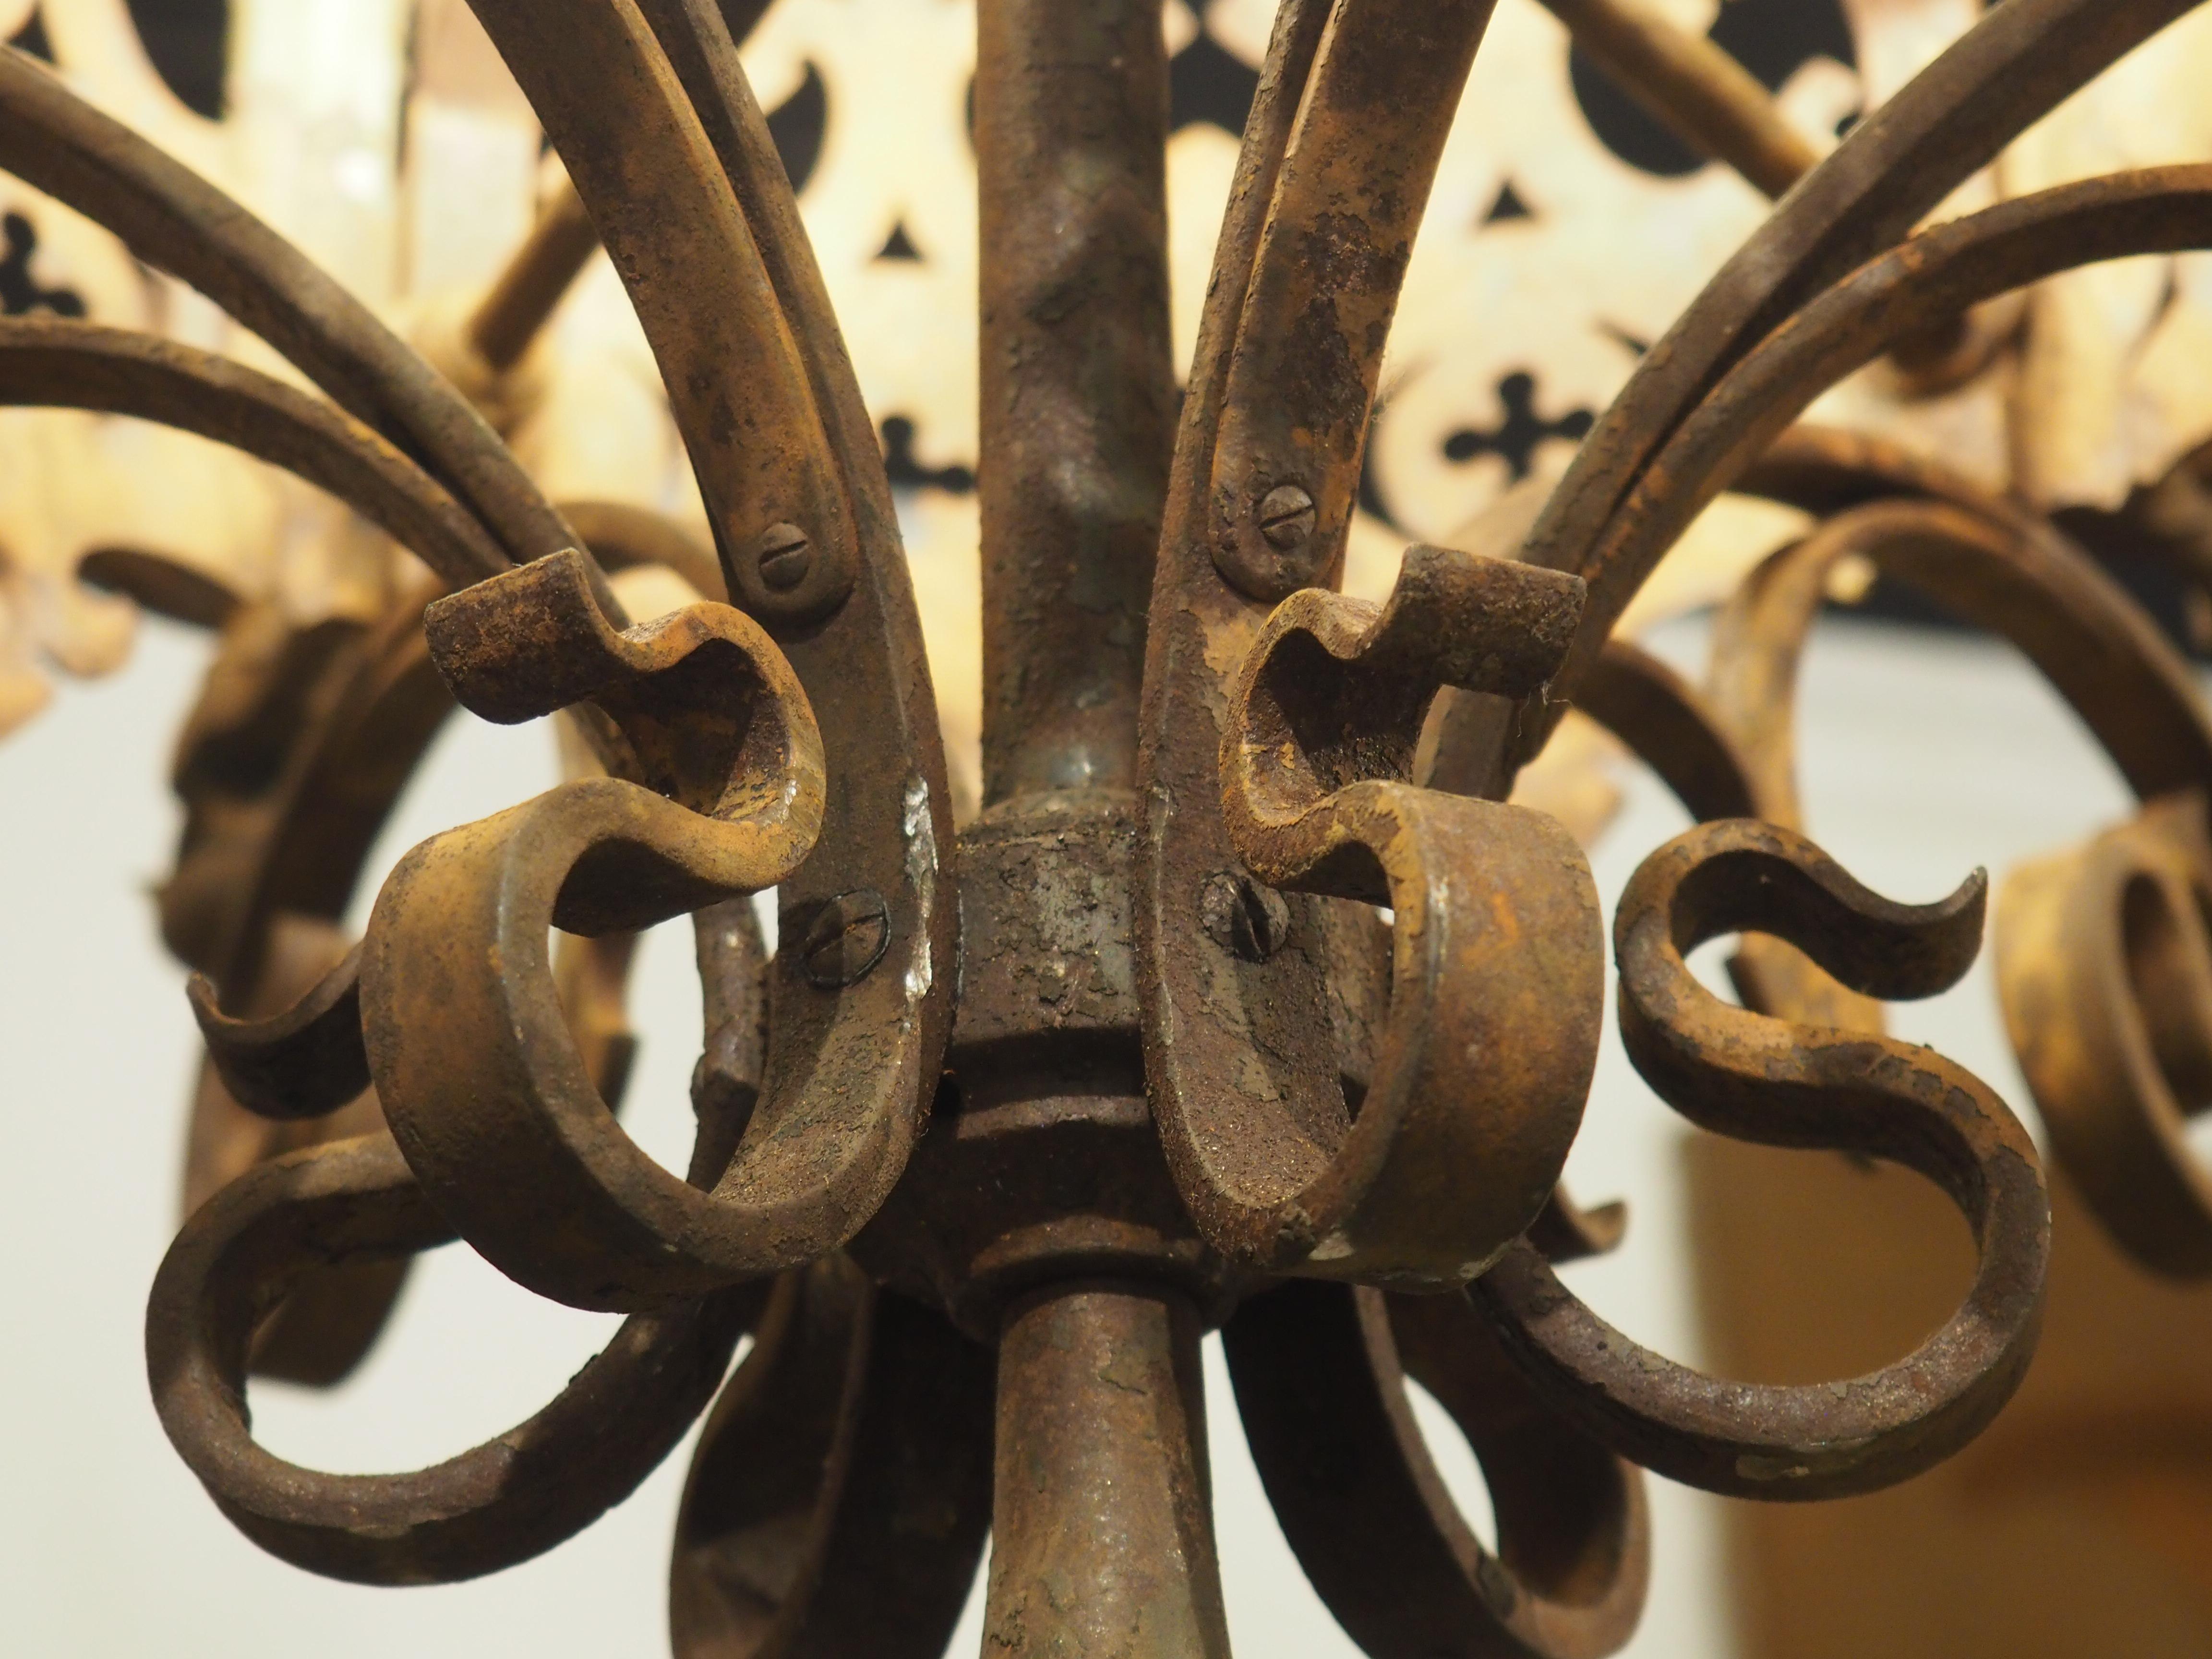 Dating to the latter half of the 19th century, circa 1880, this French wrought and pinned iron chandelier is in the Gothic style, as evidenced by the highly detailed ring that comprises the bottom bowl. A pierced ring adorned with a repeating